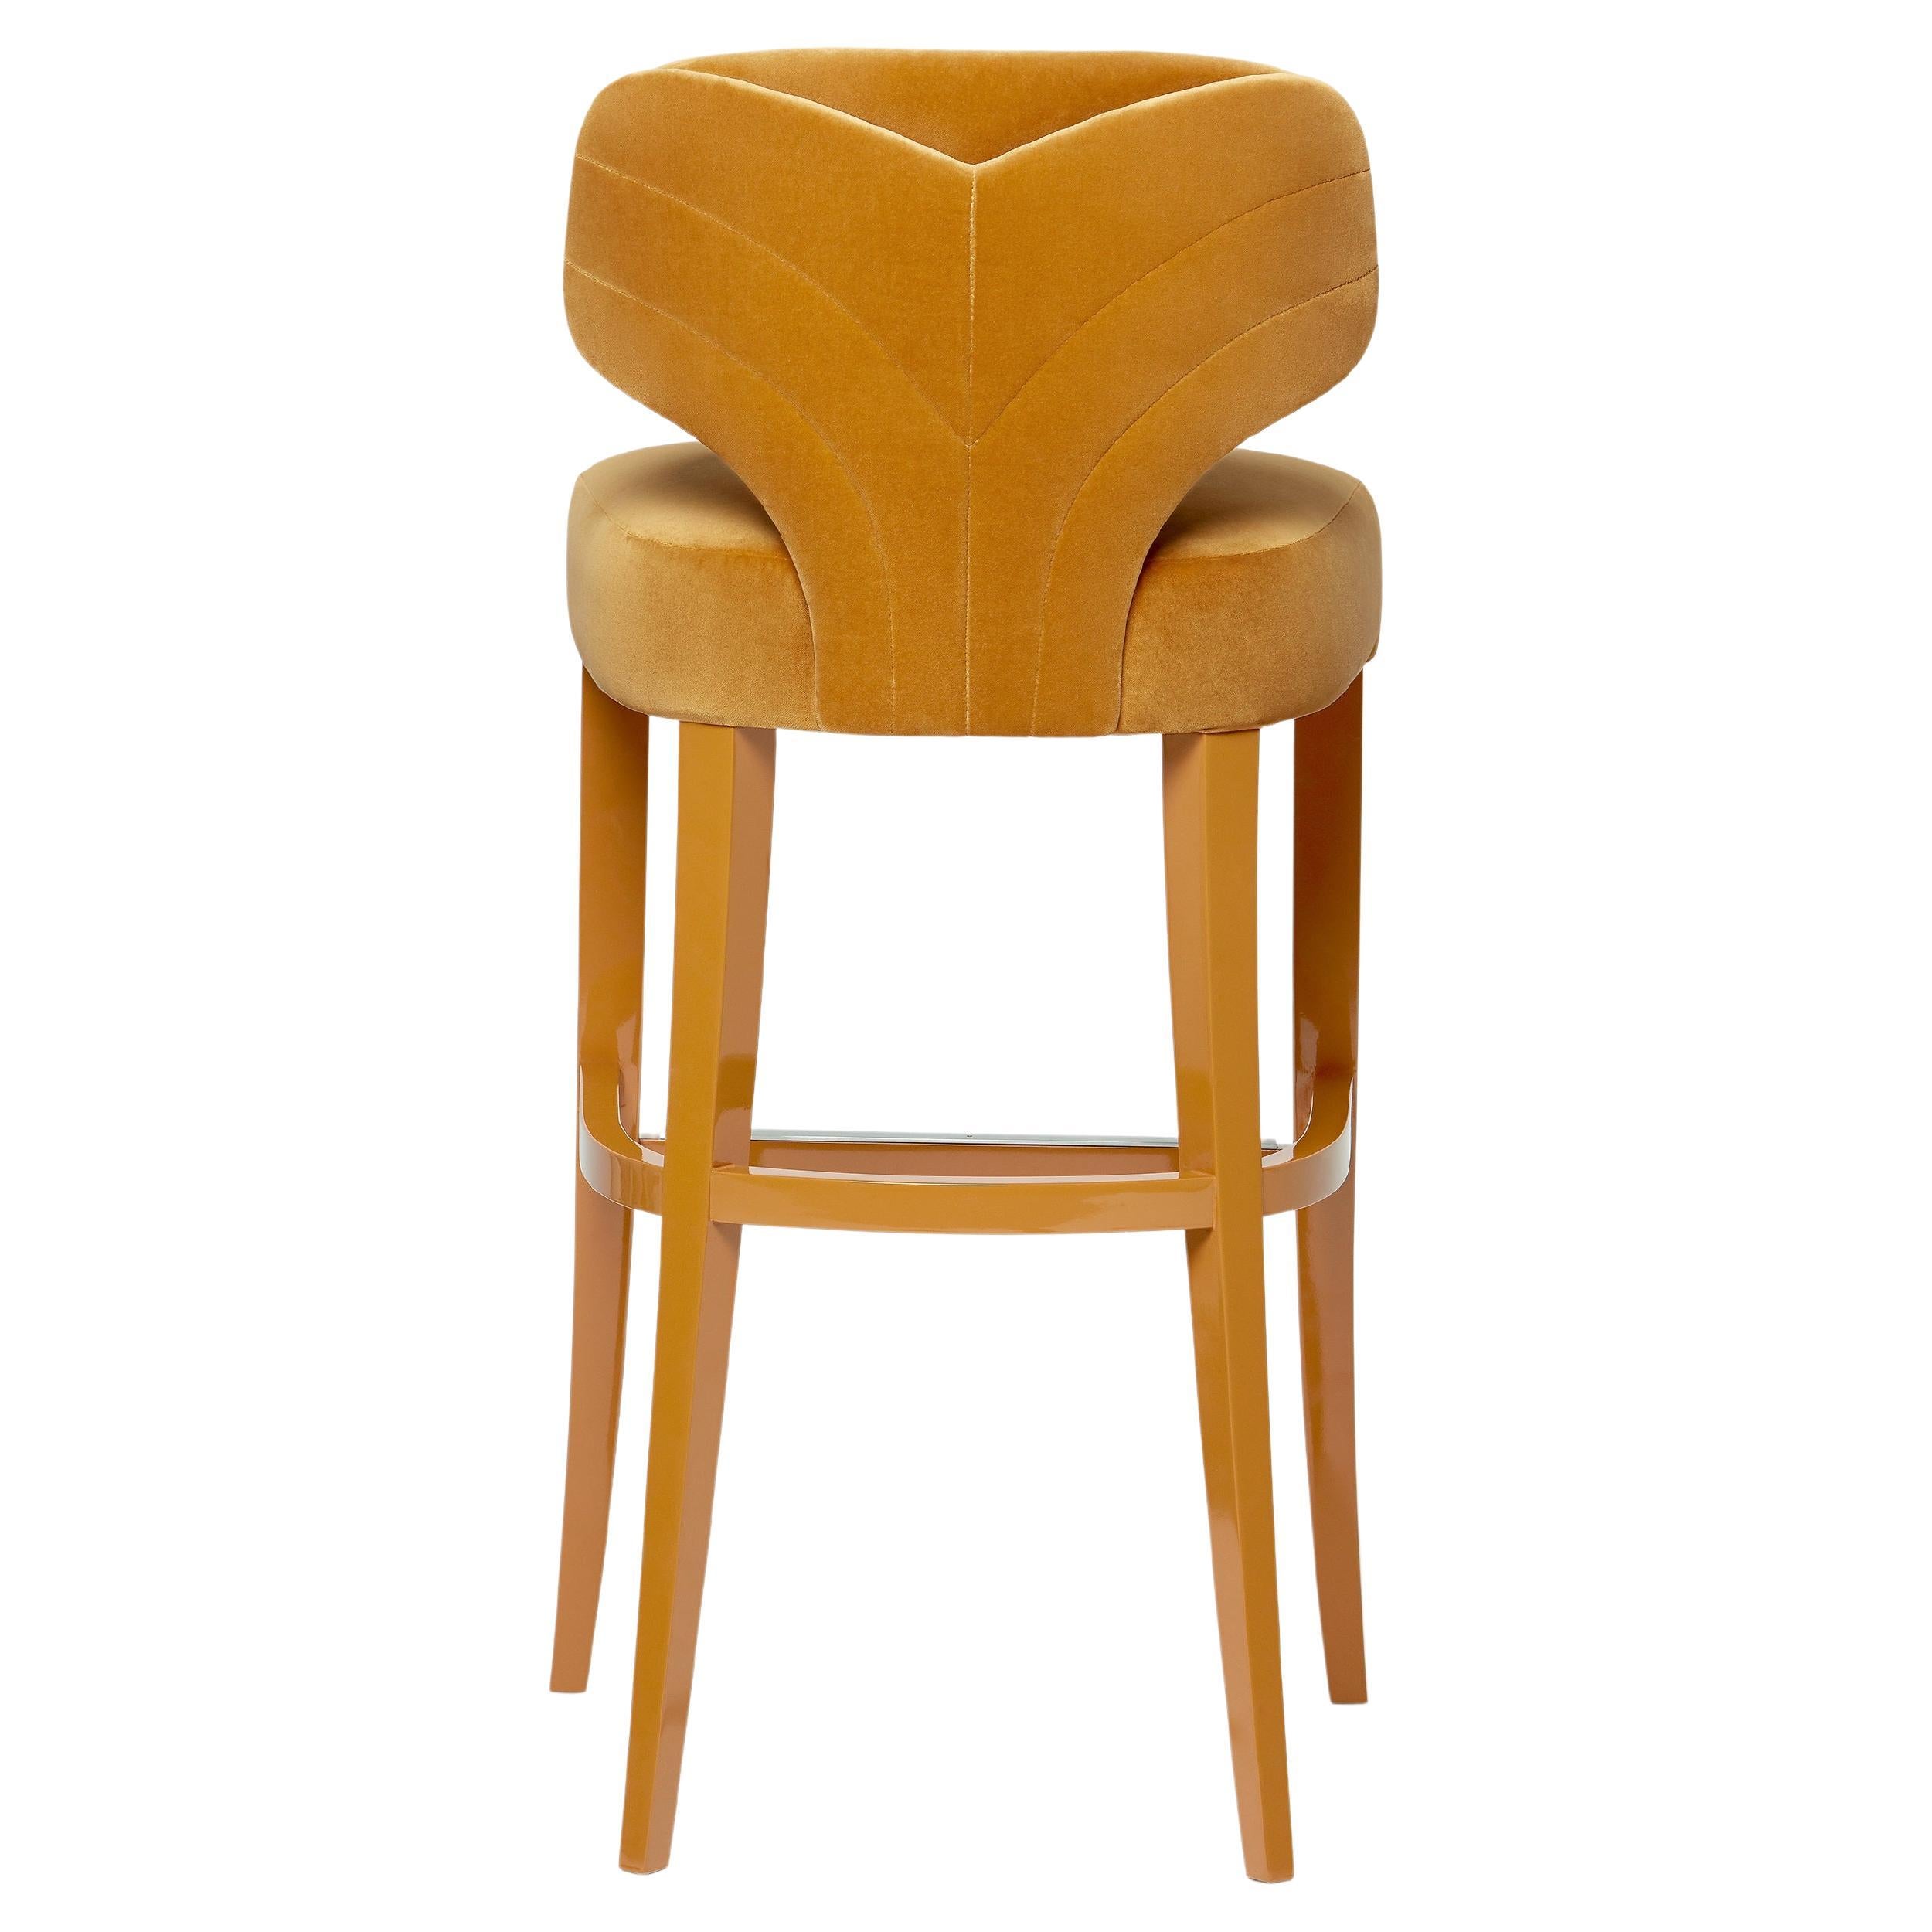 Contemporary Barstool with Seaming Details on the Back For Sale